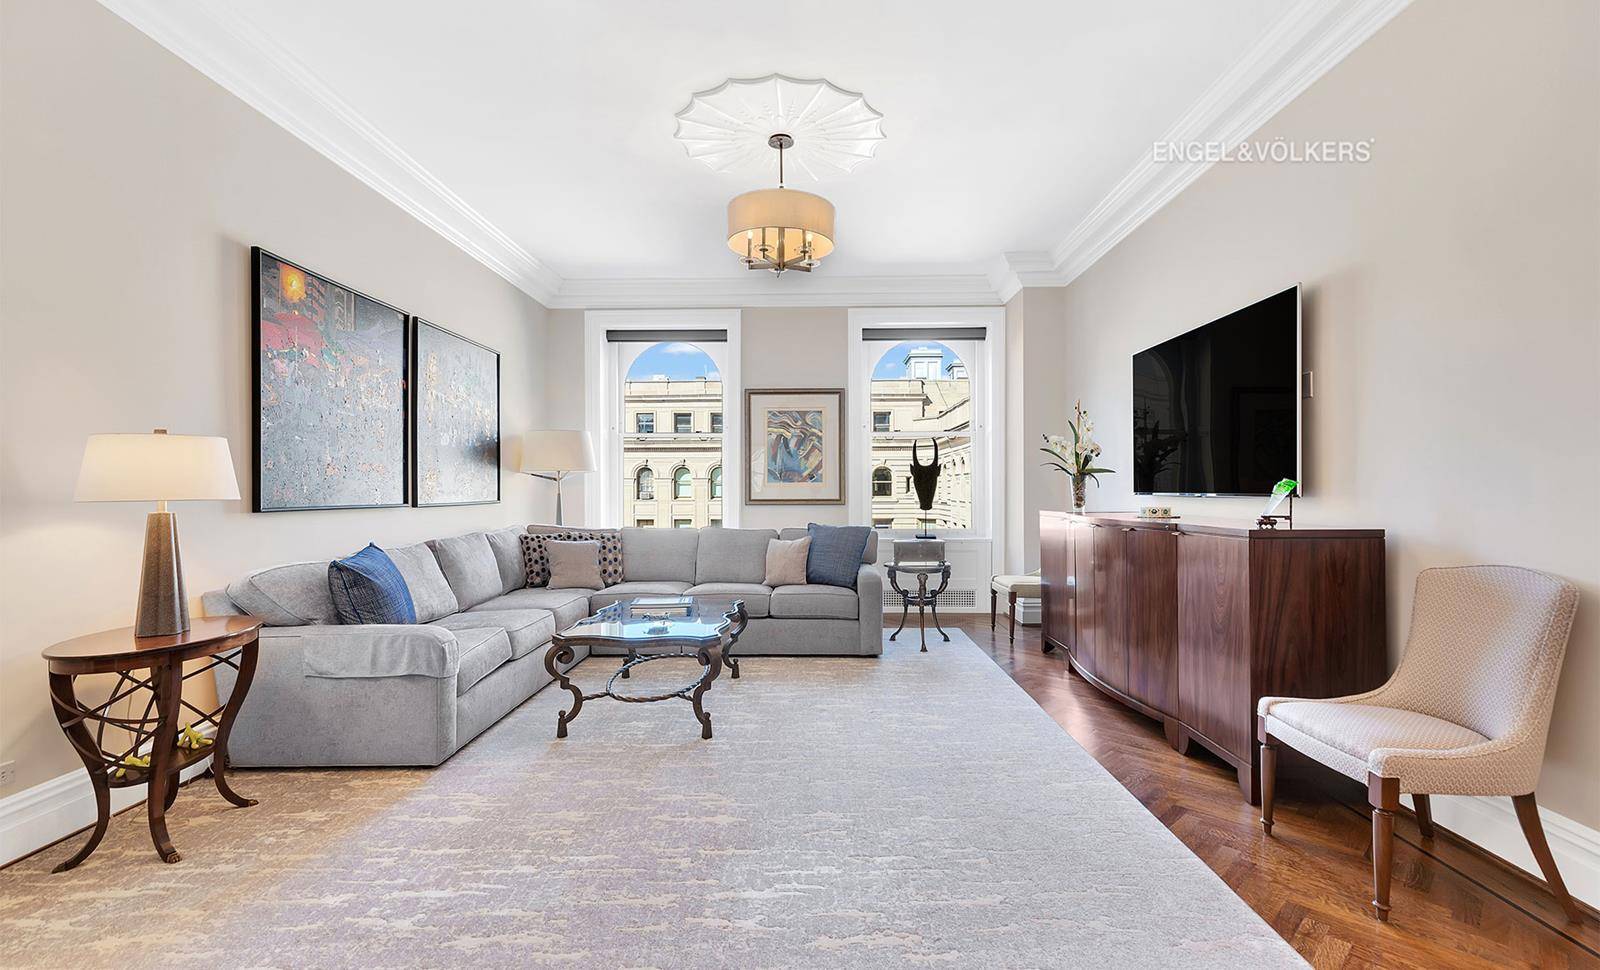 No detail has been overlooked in the gracious renovated 3 bedroom, 3 bathroom pre war home at the Apthorp.